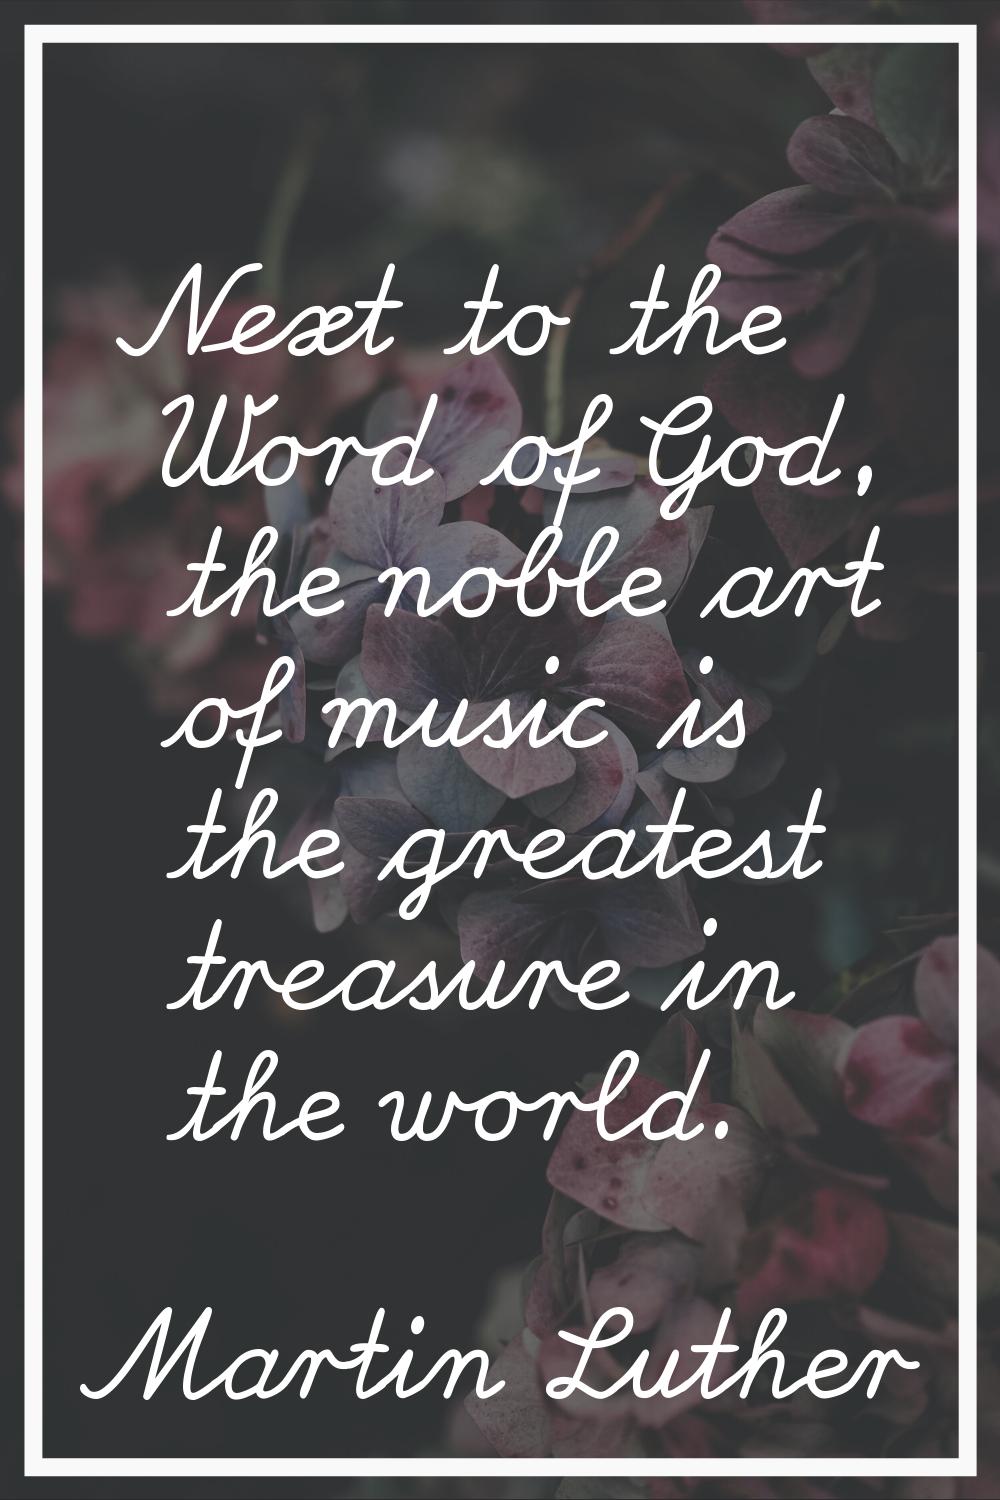 Next to the Word of God, the noble art of music is the greatest treasure in the world.